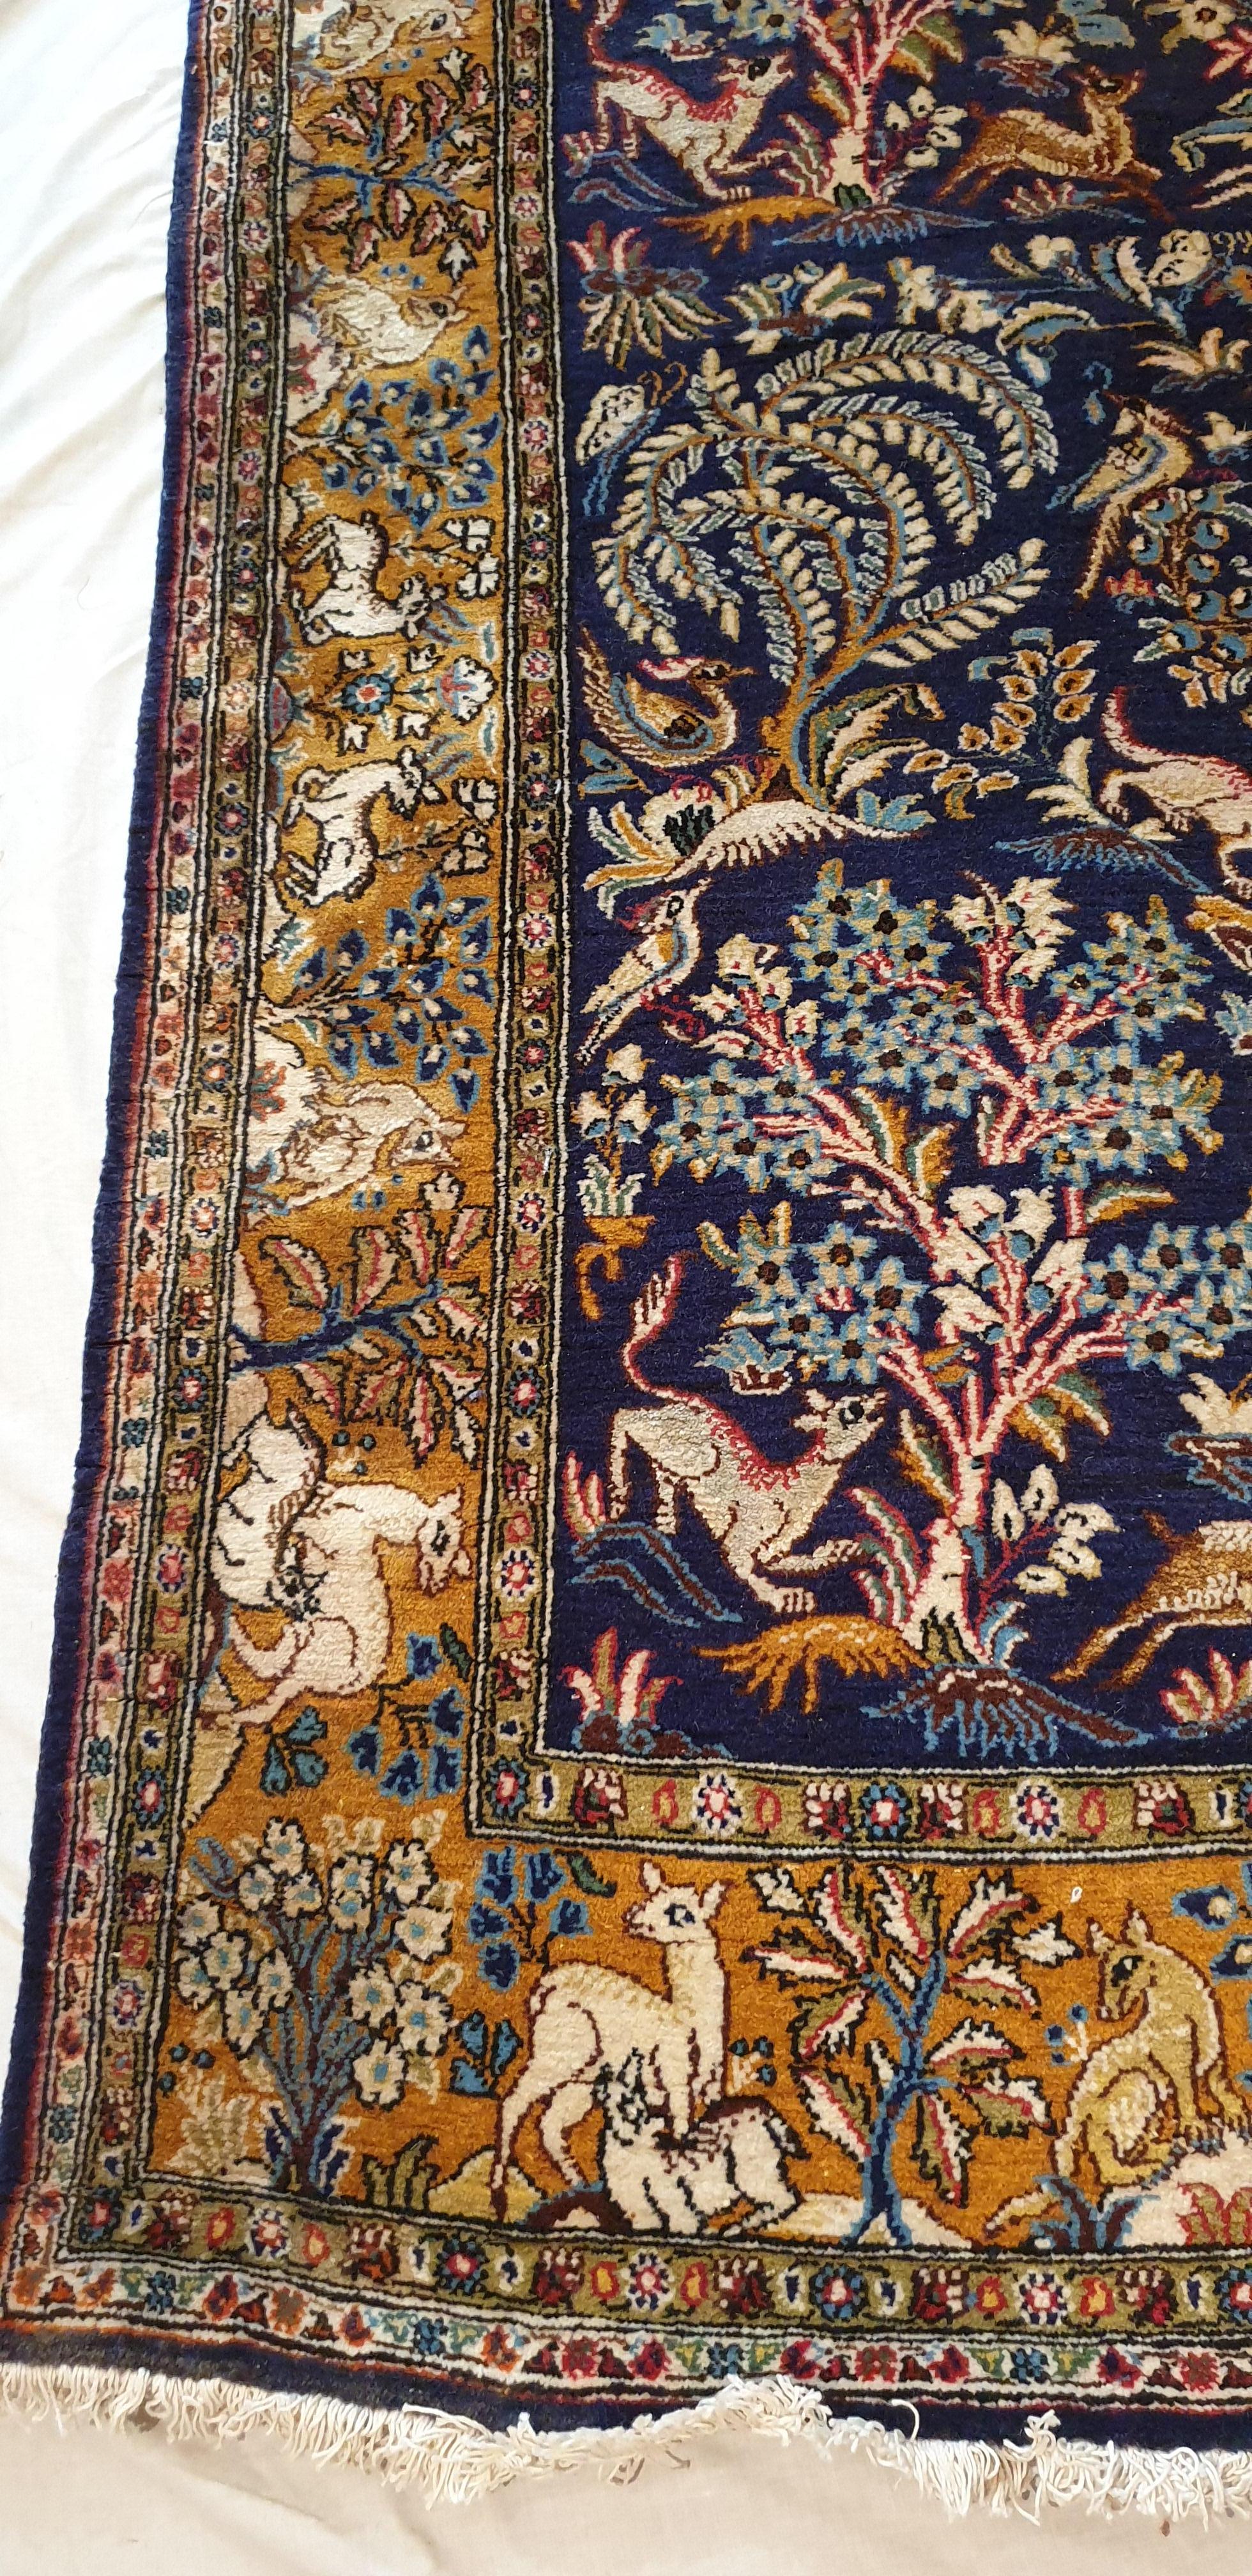 Hand-Knotted Oriental Carpet, Handwoven 19th Century